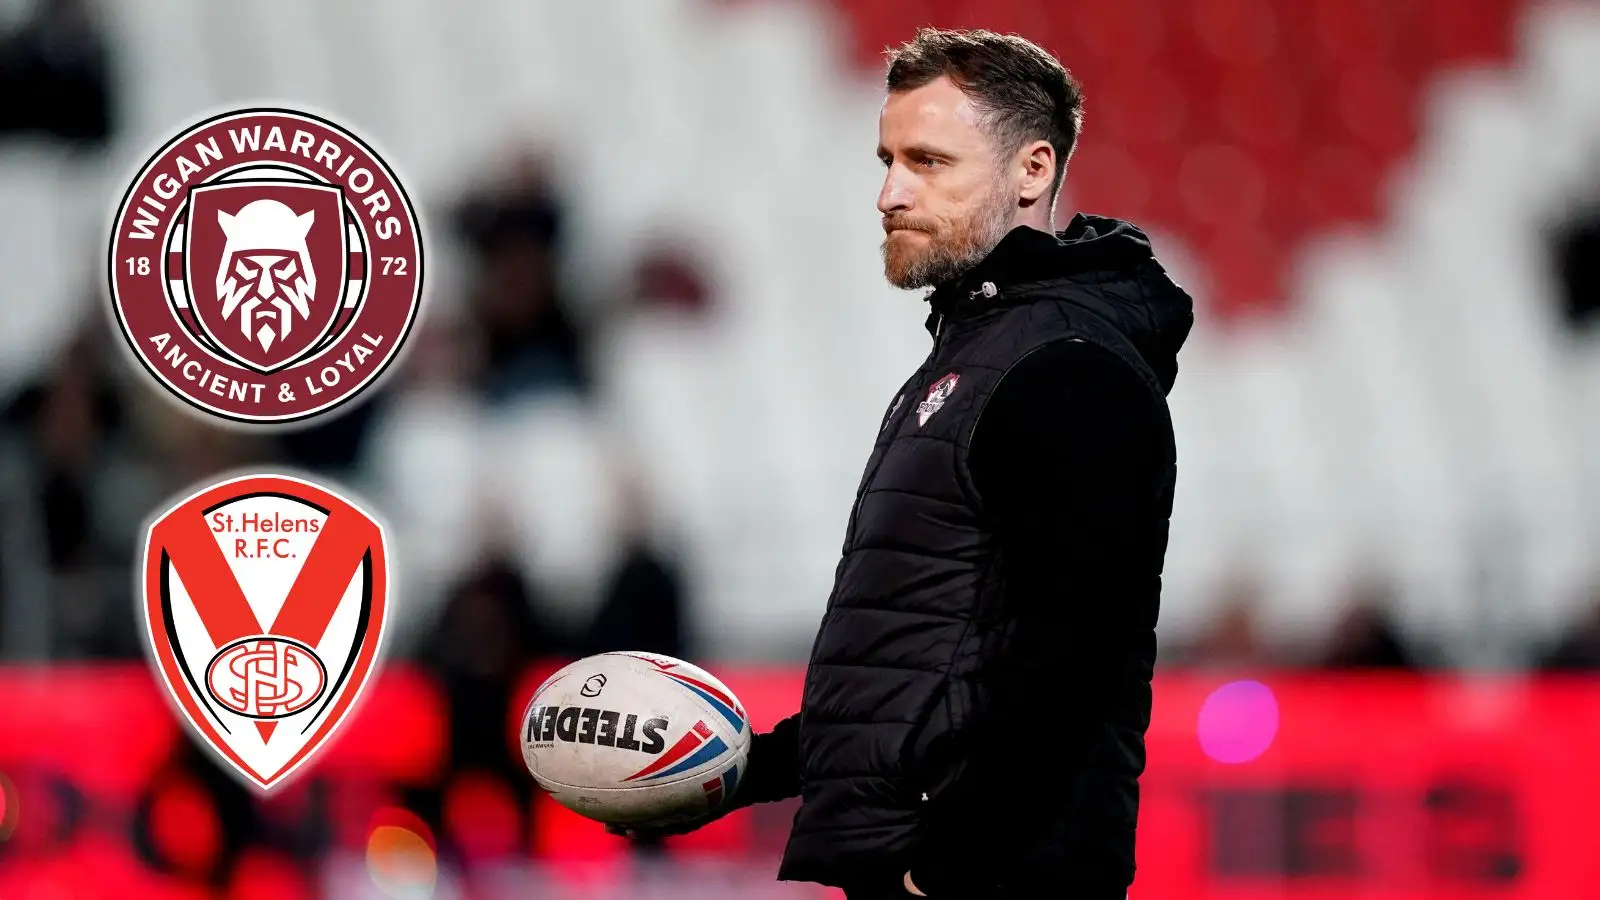 Wigan Warriors & St Helens likened to ‘NRL standard’ in classy compliment from rival Super League coach